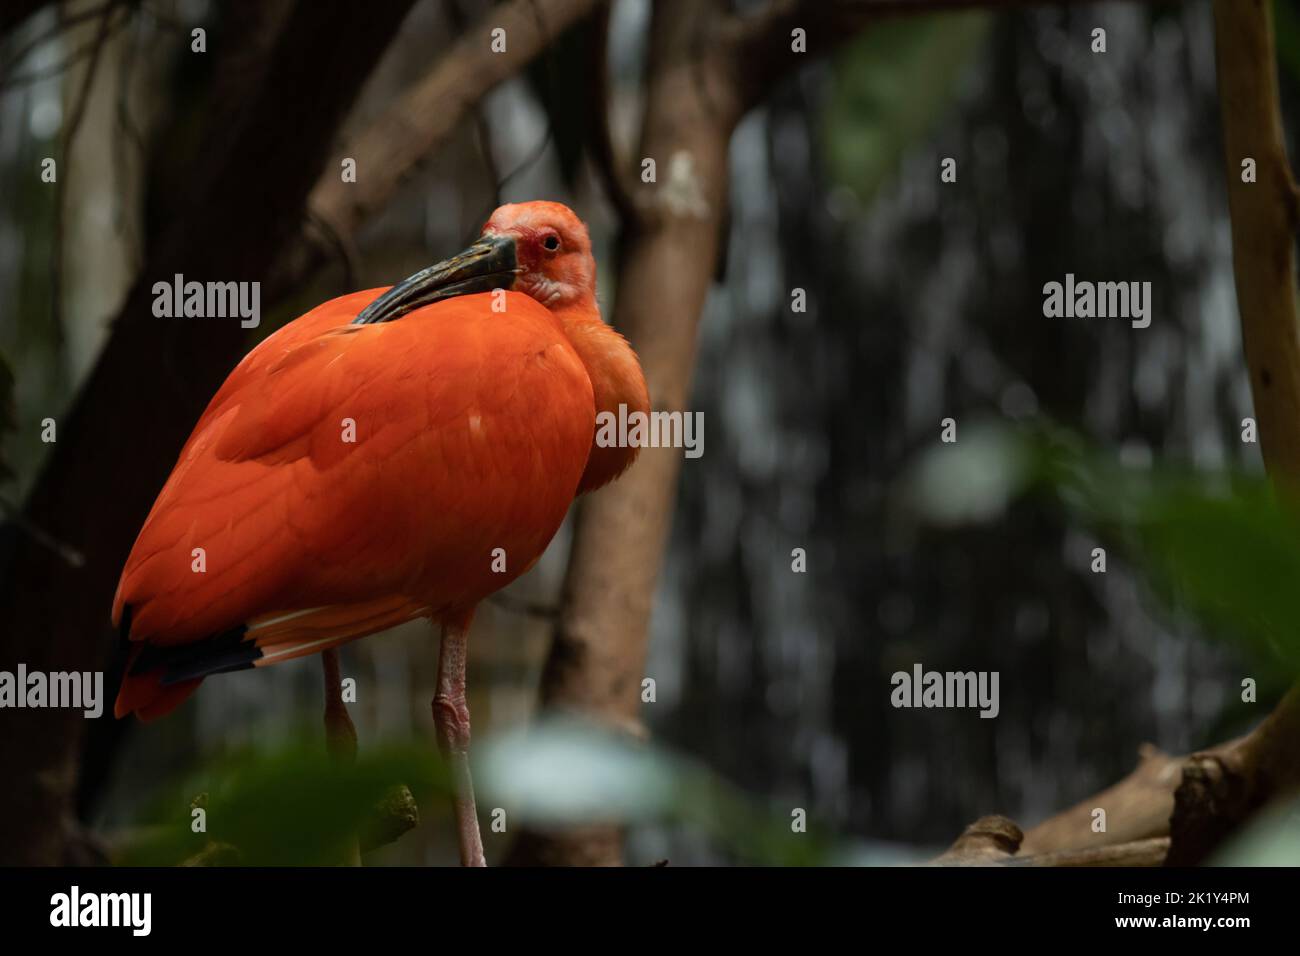 A scarlet ibis rests on a branch, head turned back and sleepy. It has magnificent red plumage. Stock Photo